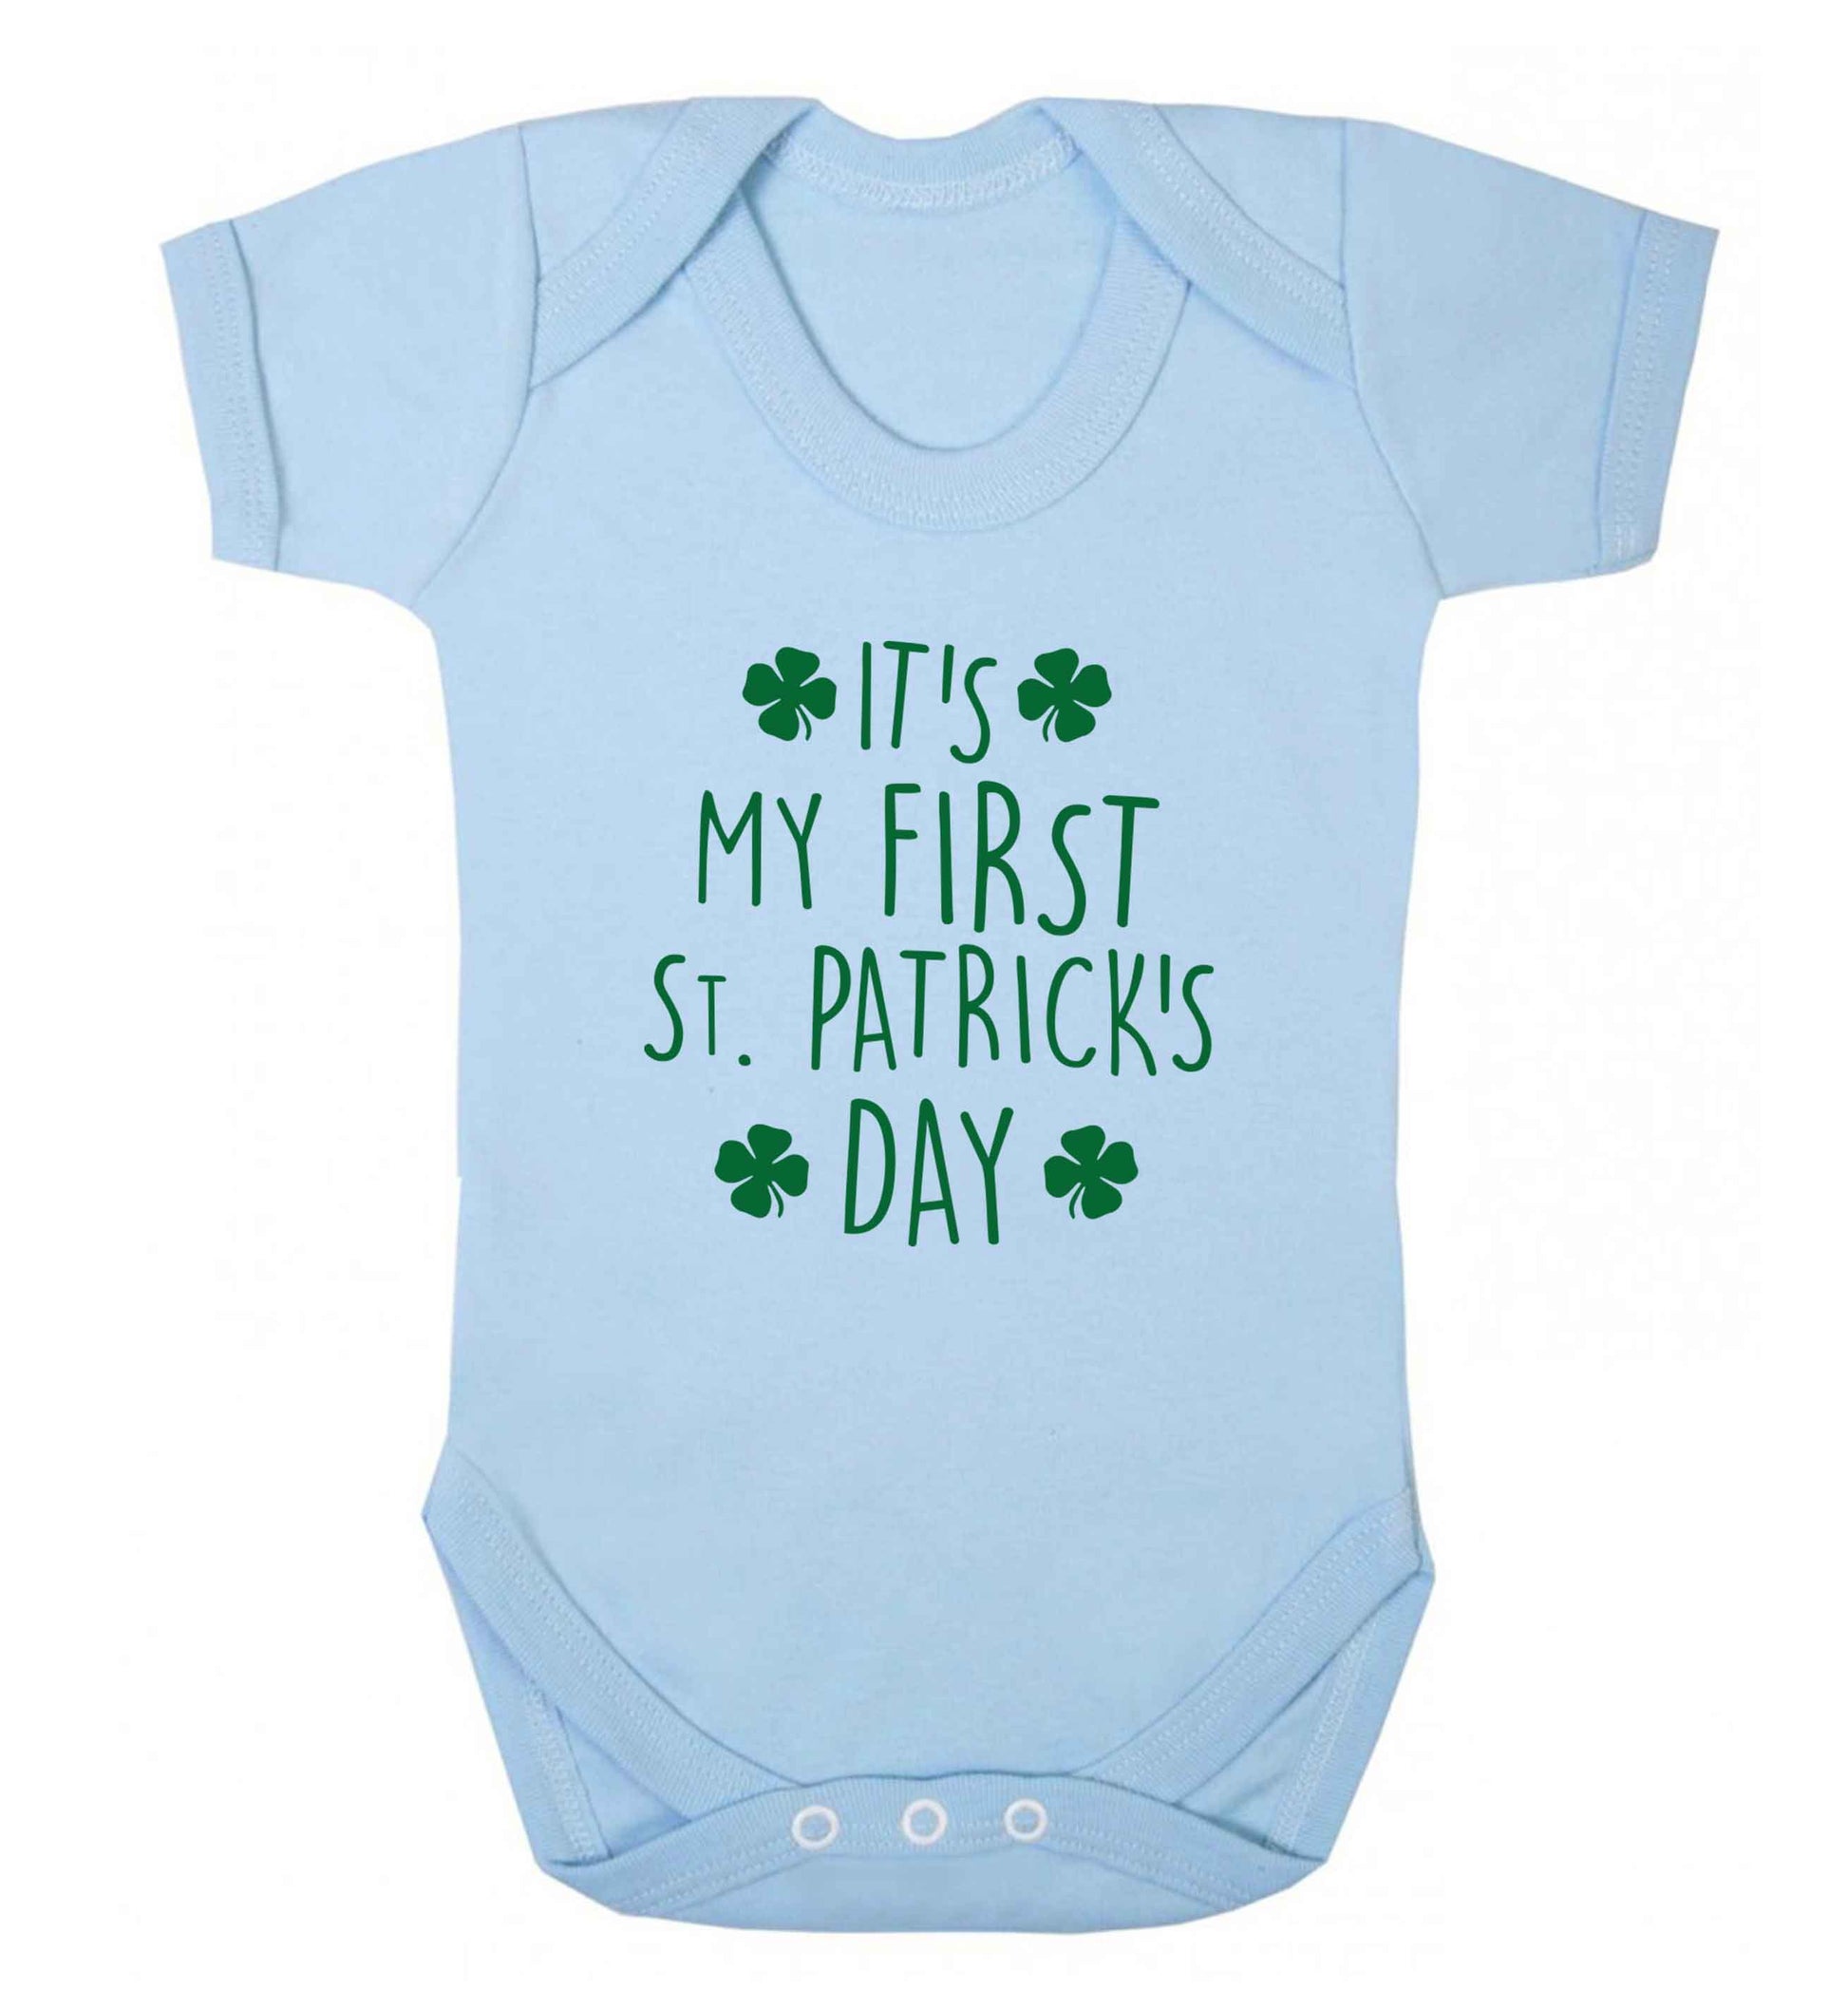 It's my first St.Patrick's day baby vest pale blue 18-24 months